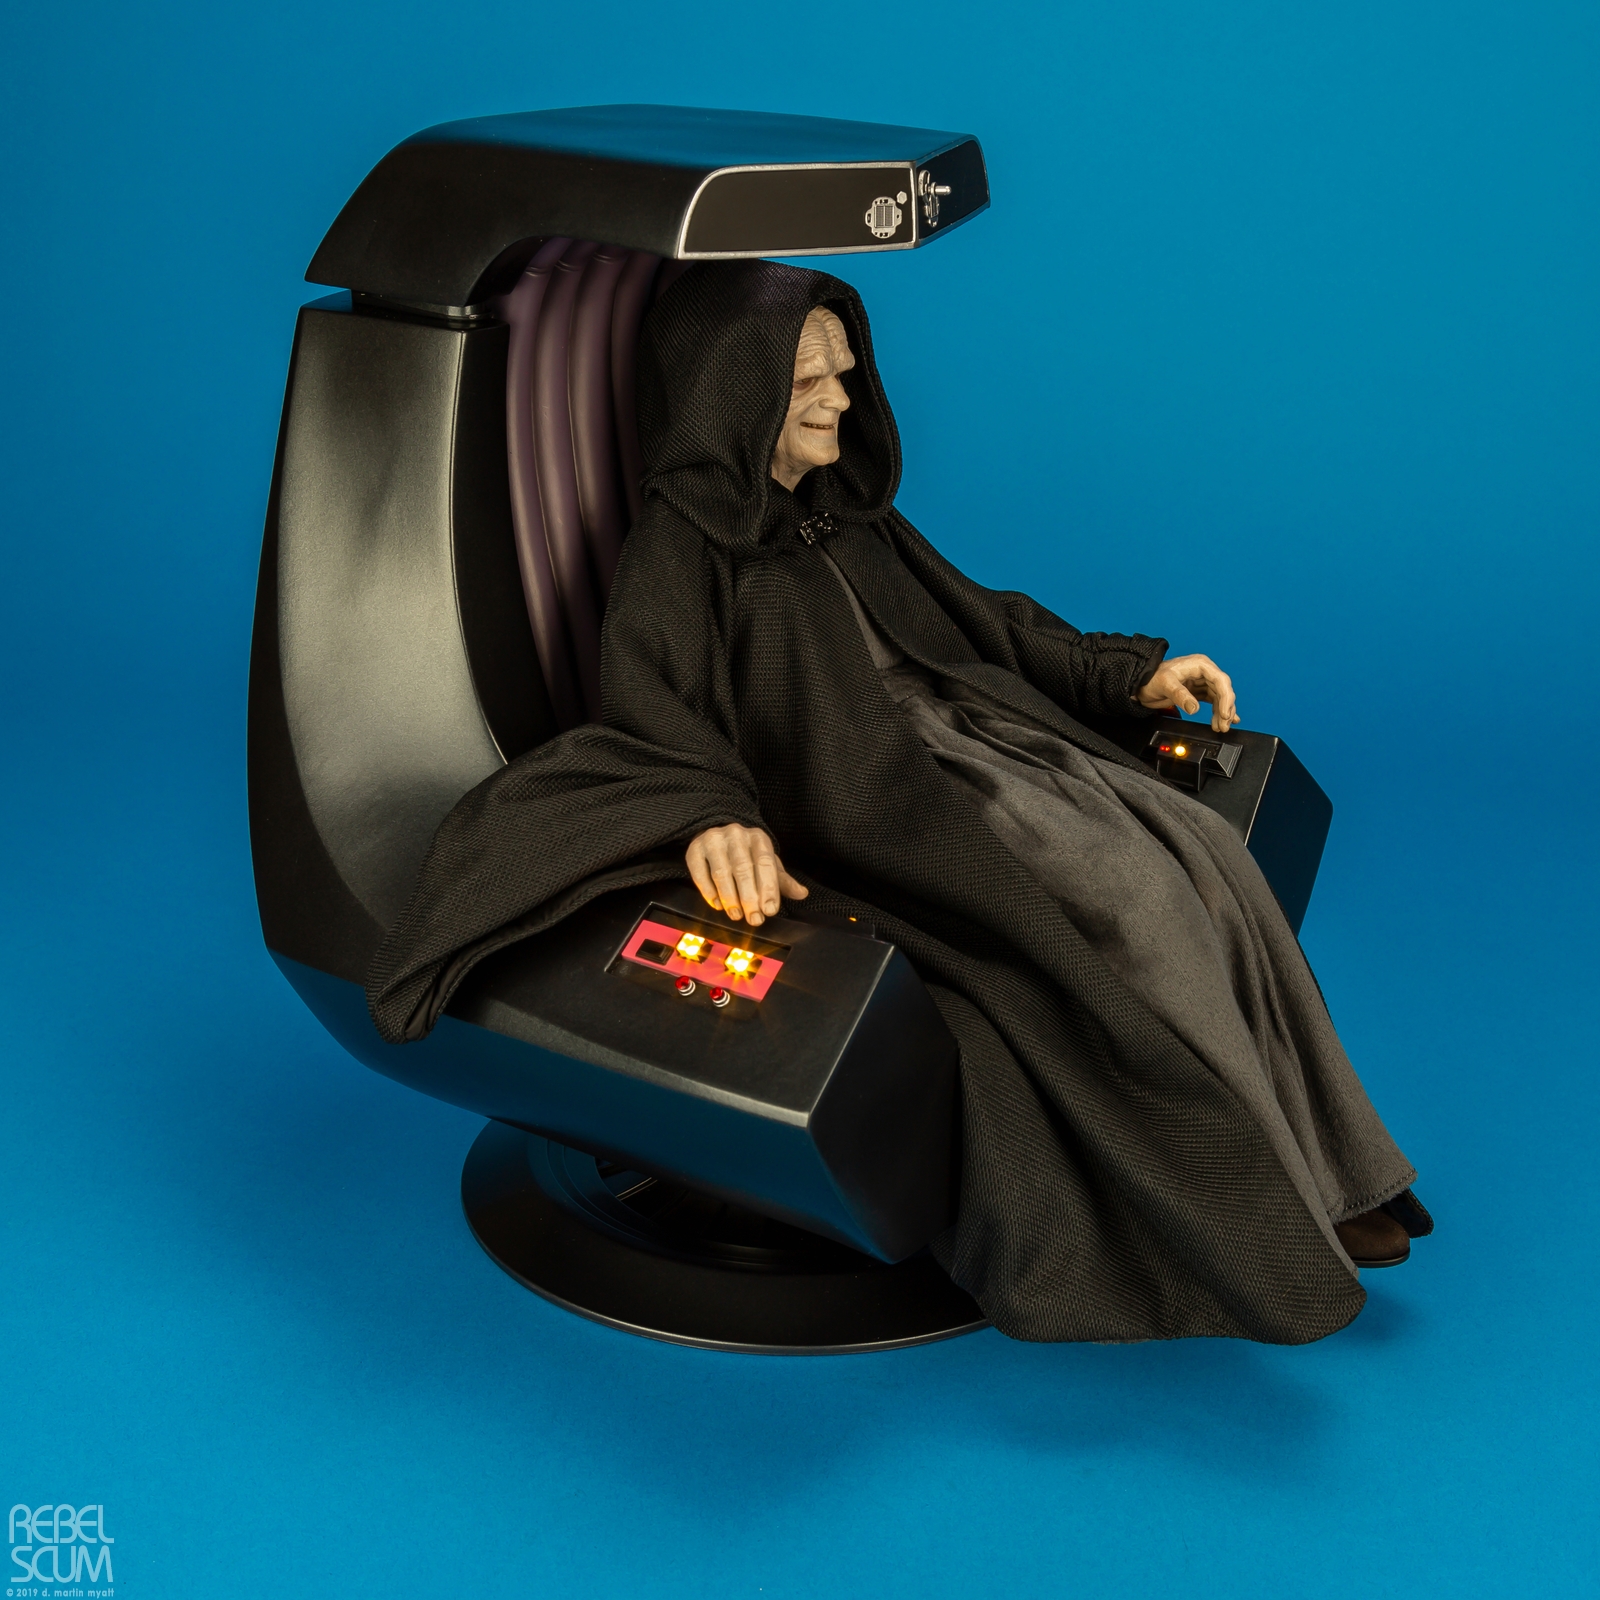 Emperor-Palpatine-Deluxe-Version-MMS468-Hot-Toys-006.jpg